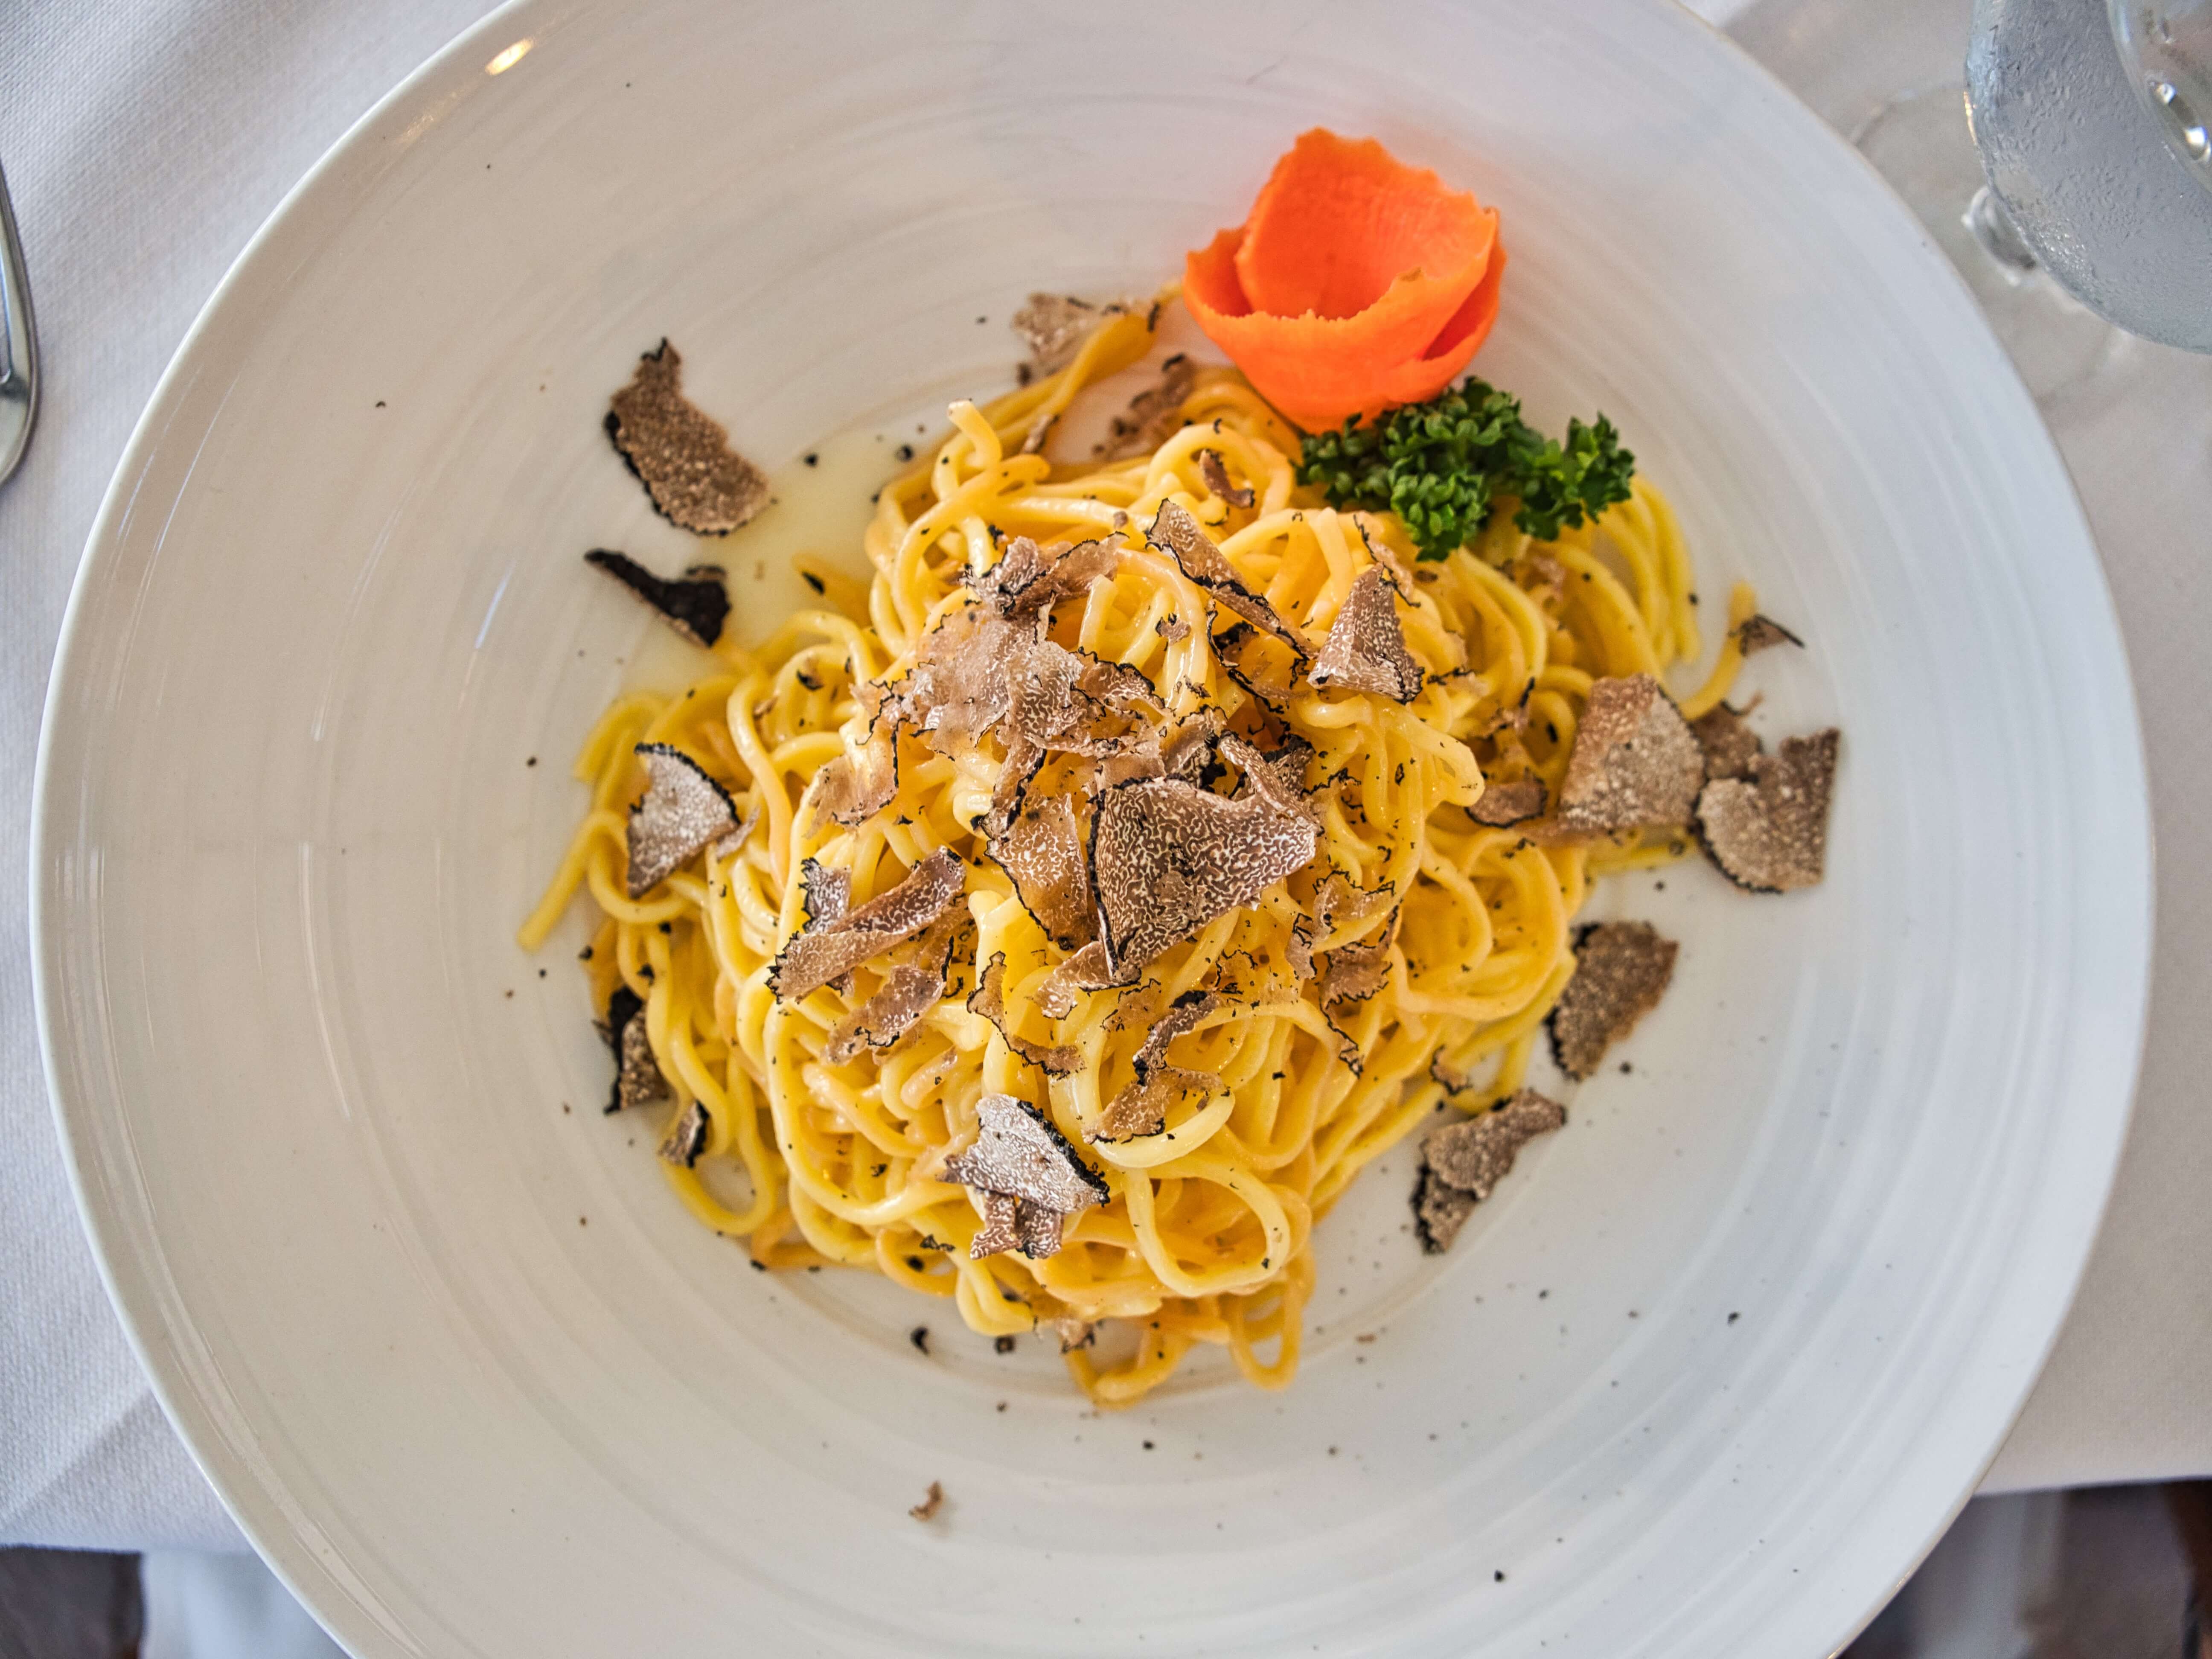 A picture of truffles on pasta to represent our spice wholesalers and dried seasoning.